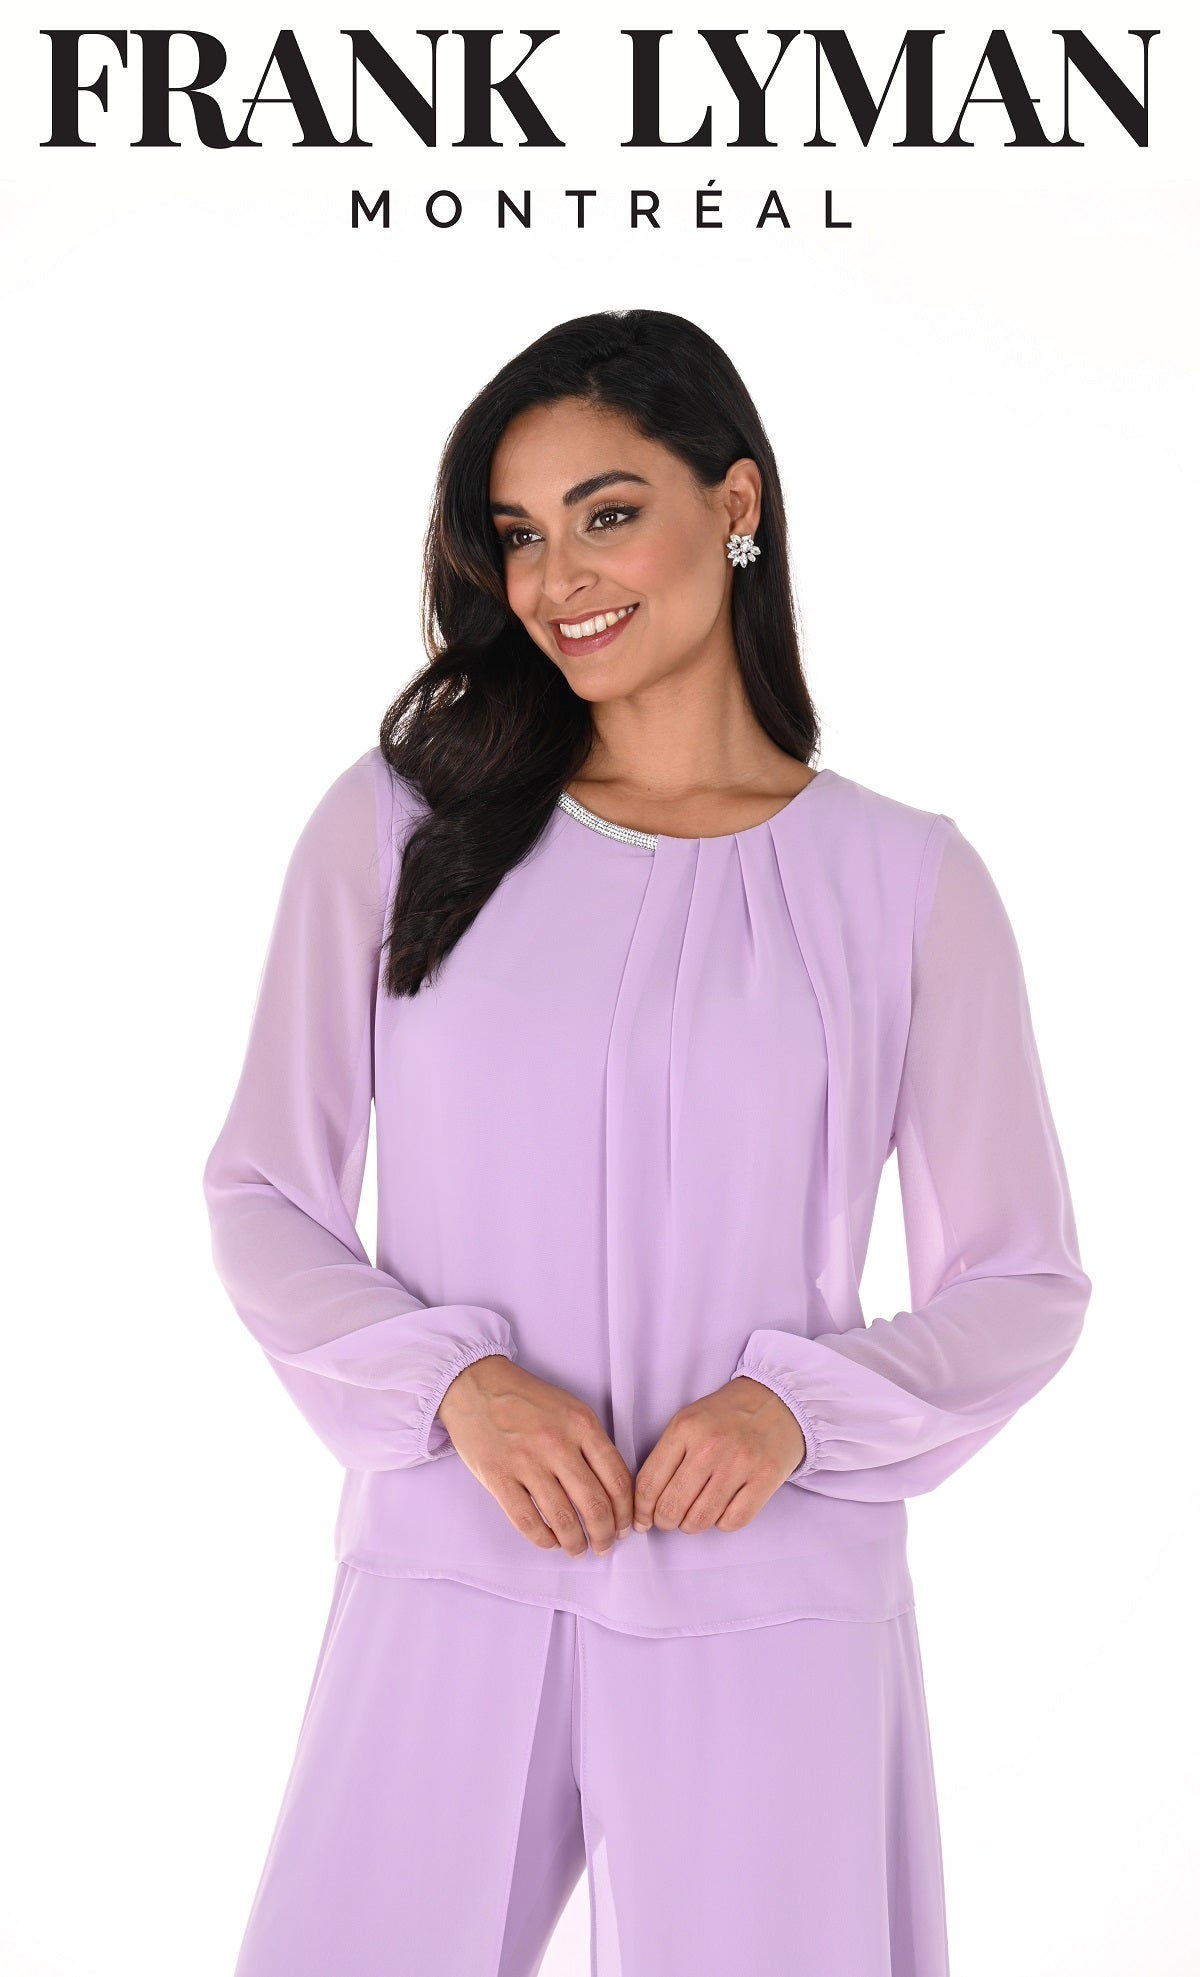 Frank Lyman Montreal Amethyst Evening Top with Back Embellished Detail